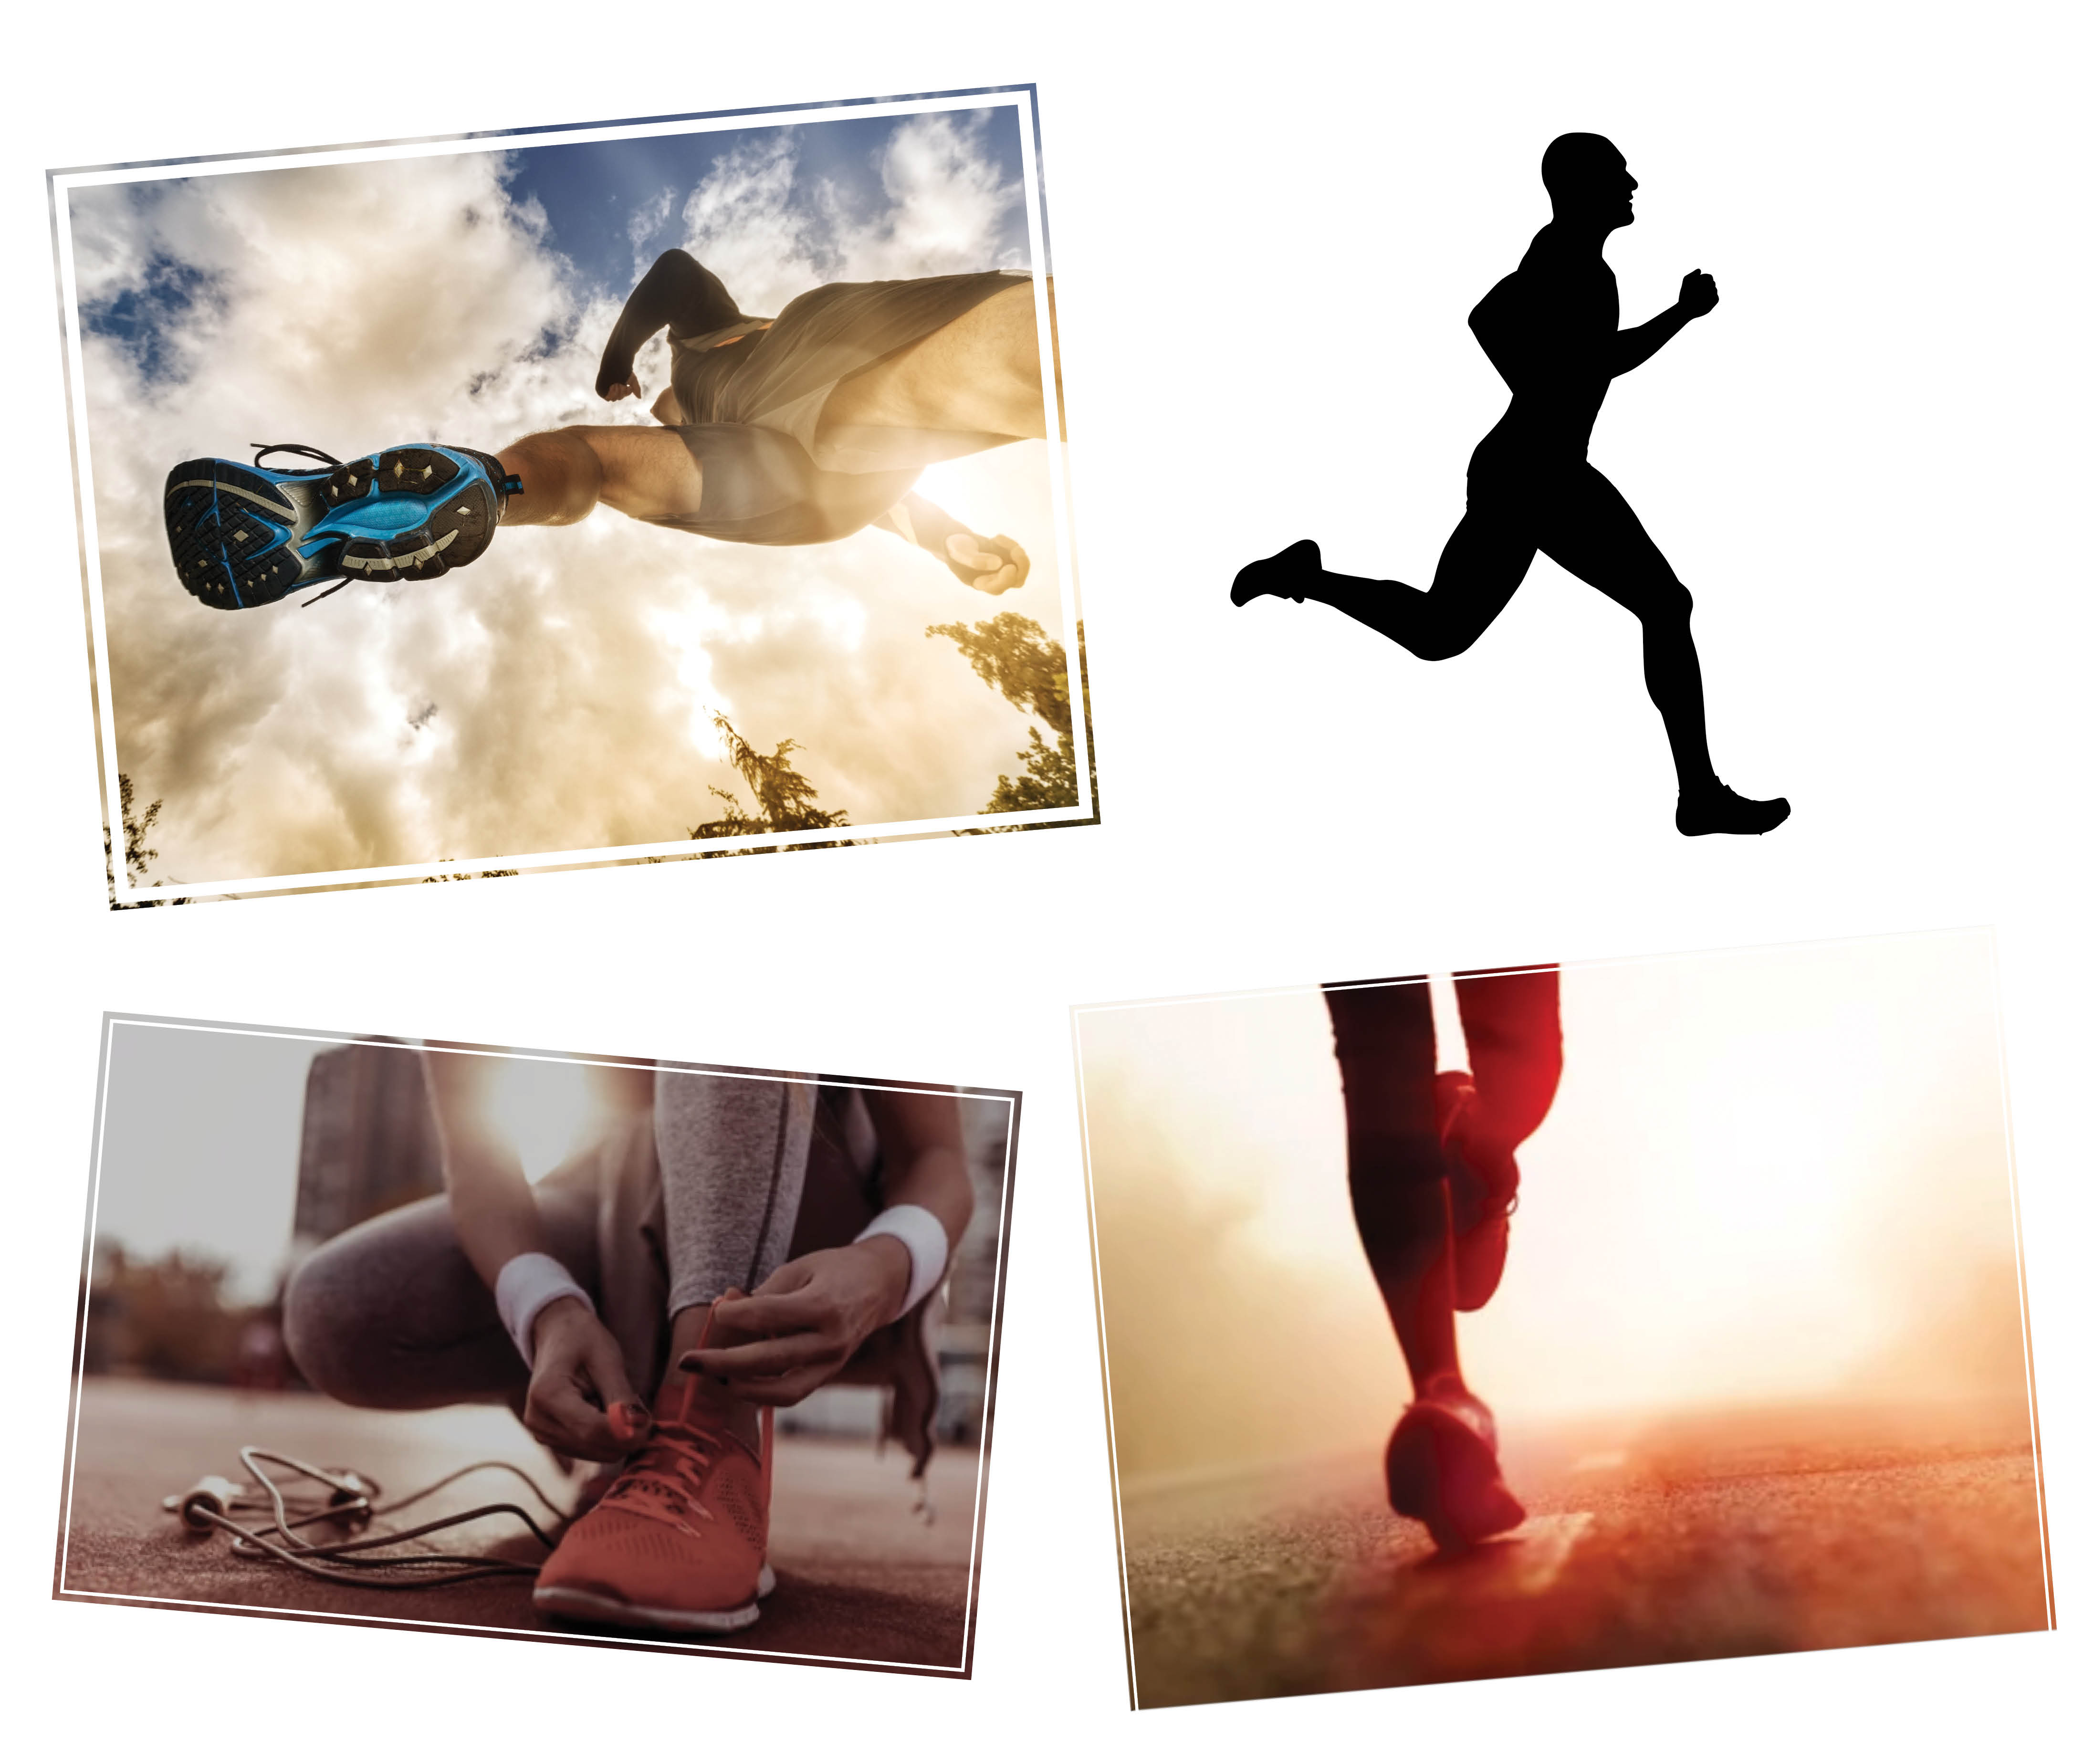 4 Exciting Pictures of Running Moments and Running Shoes.